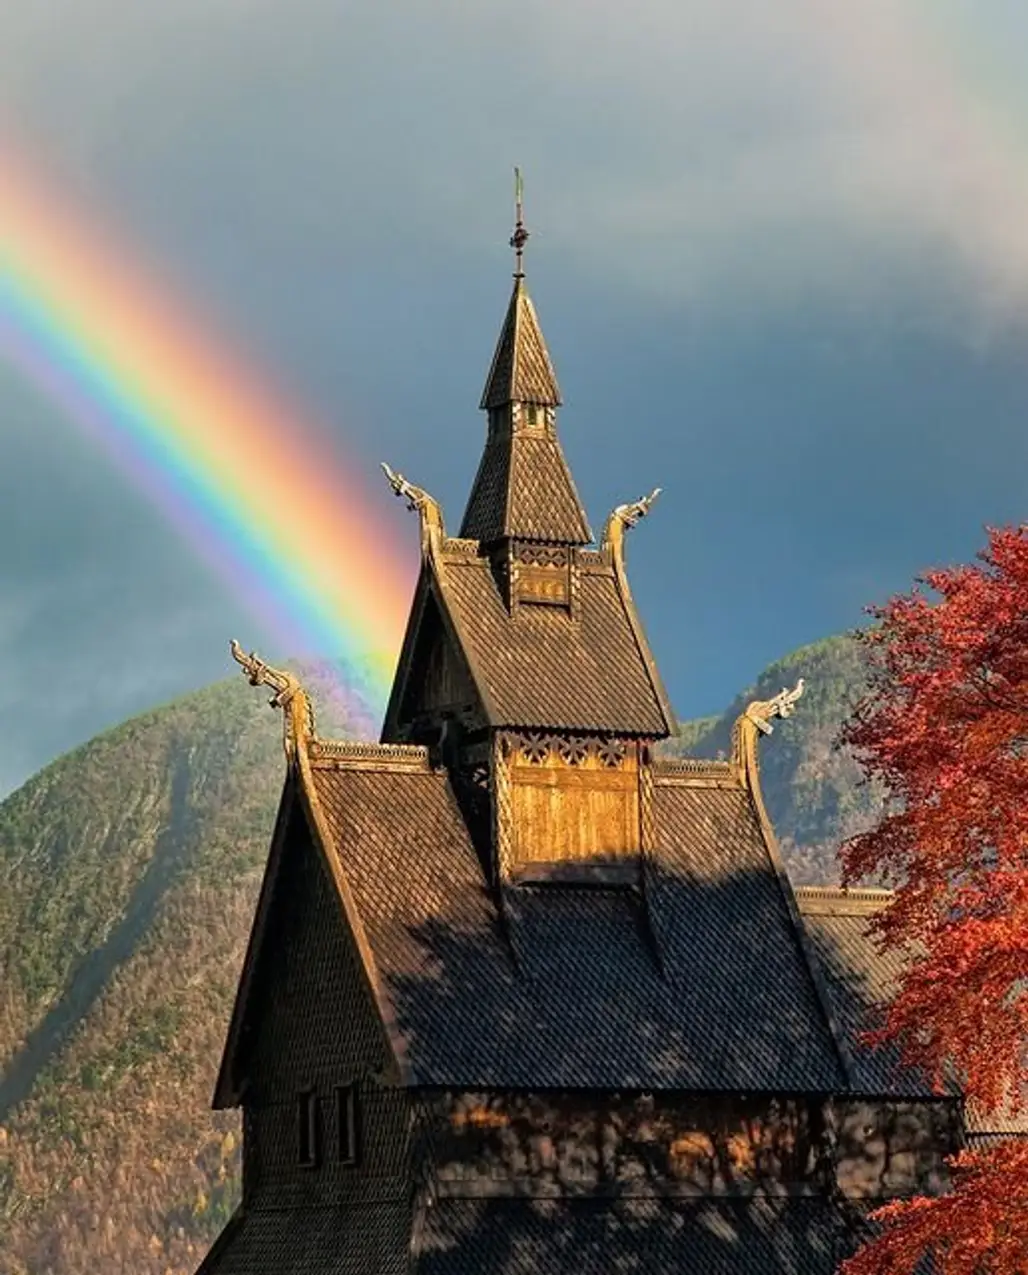 Rainbow over Hopperstad Stave Church in Vik, Norway